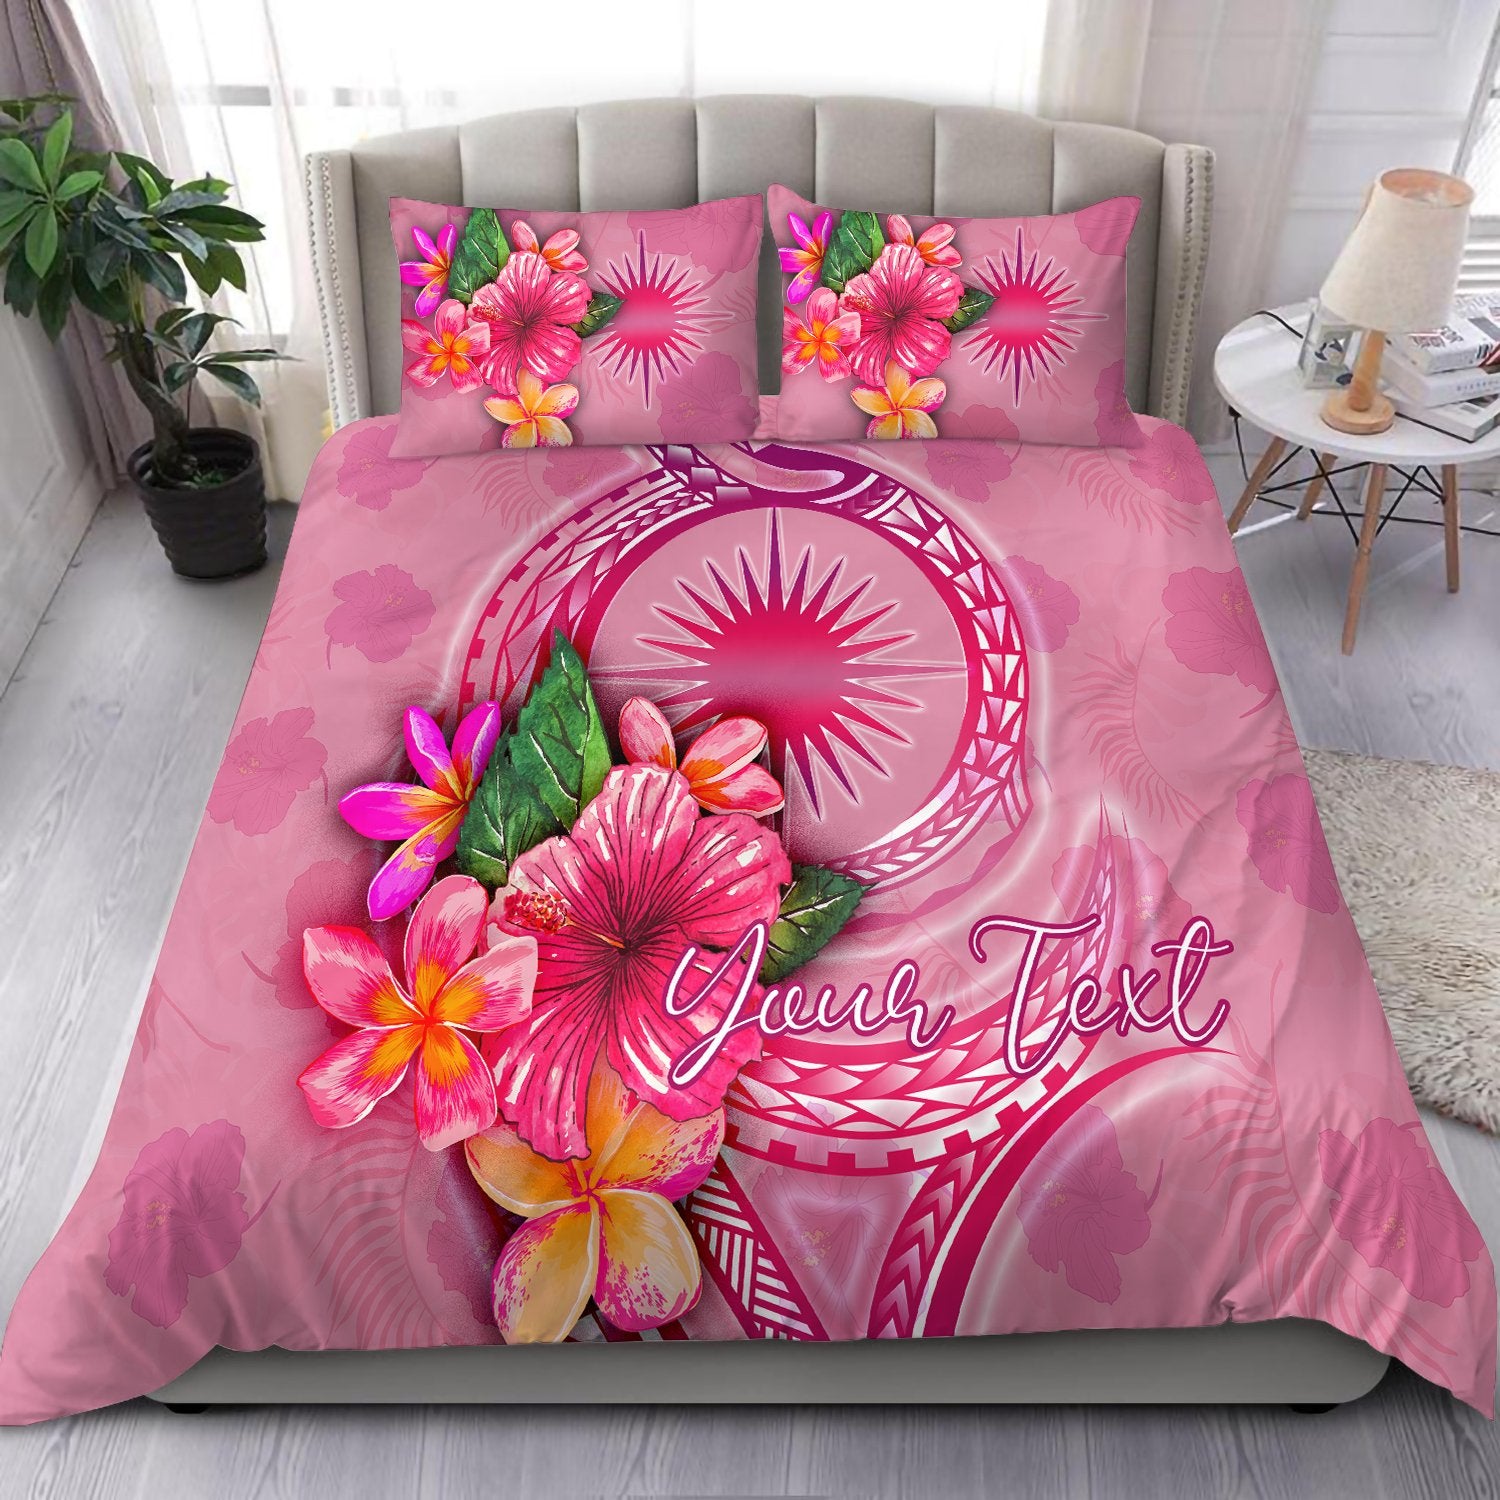 Marshall Islands Polynesian Custom Personalised Bedding Set - Floral With Seal Pink pink - Polynesian Pride